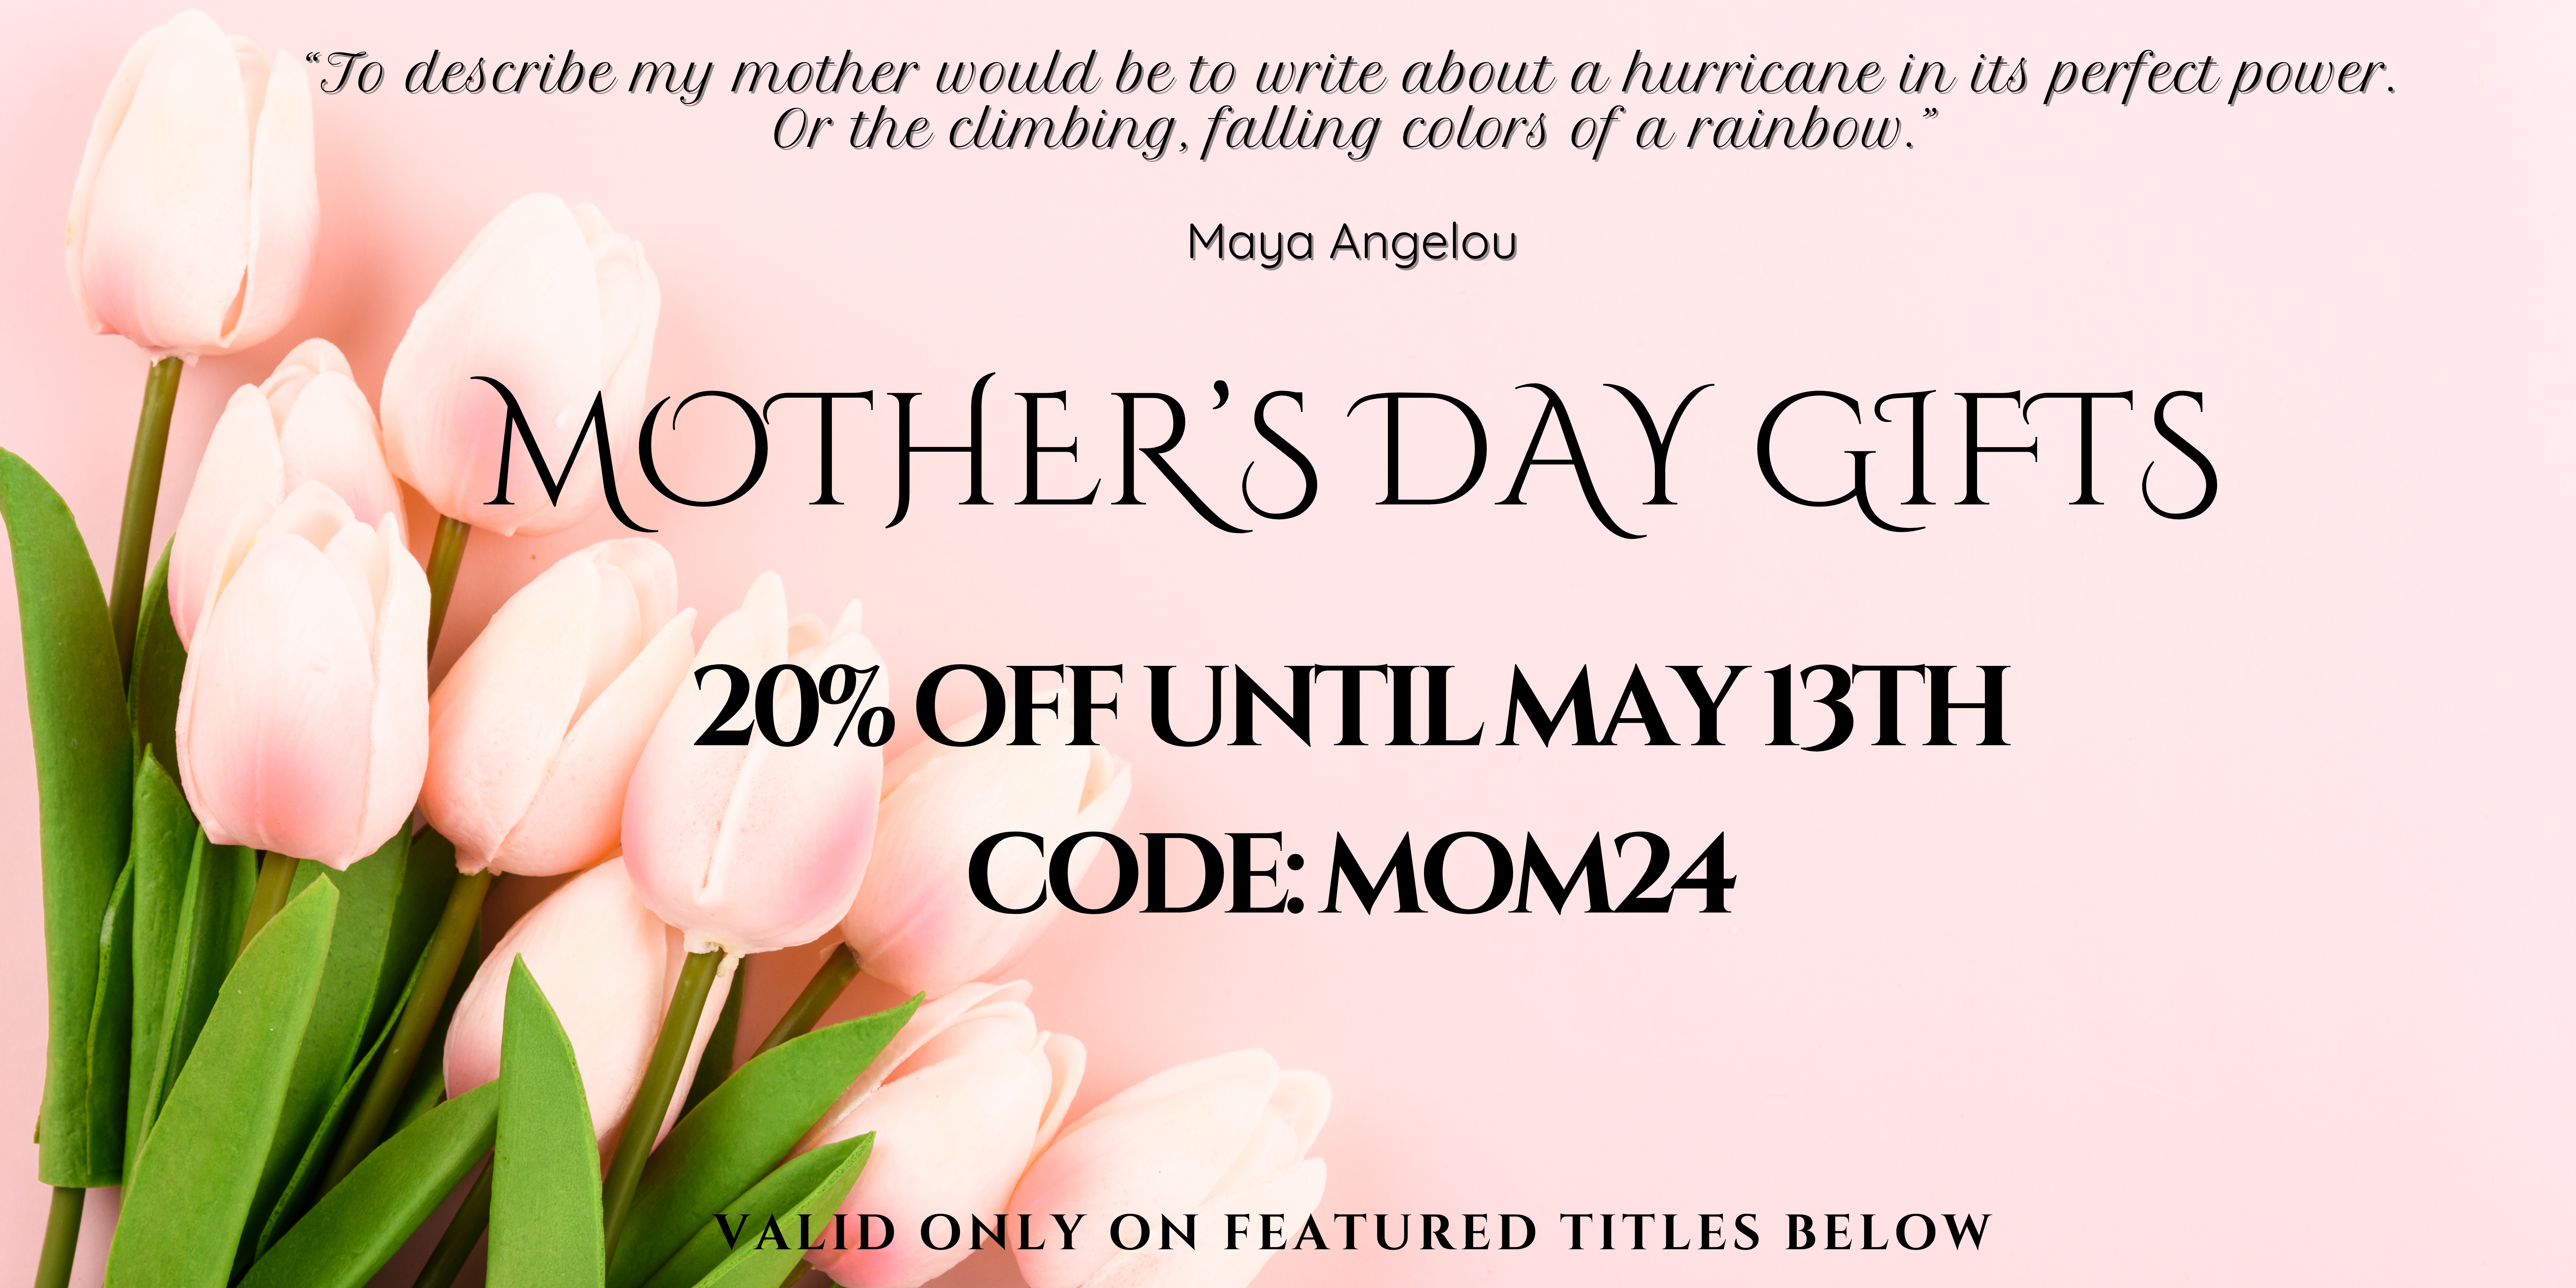 Mother’s Day Gifts 20% Off Until May 13th Code: MOM24